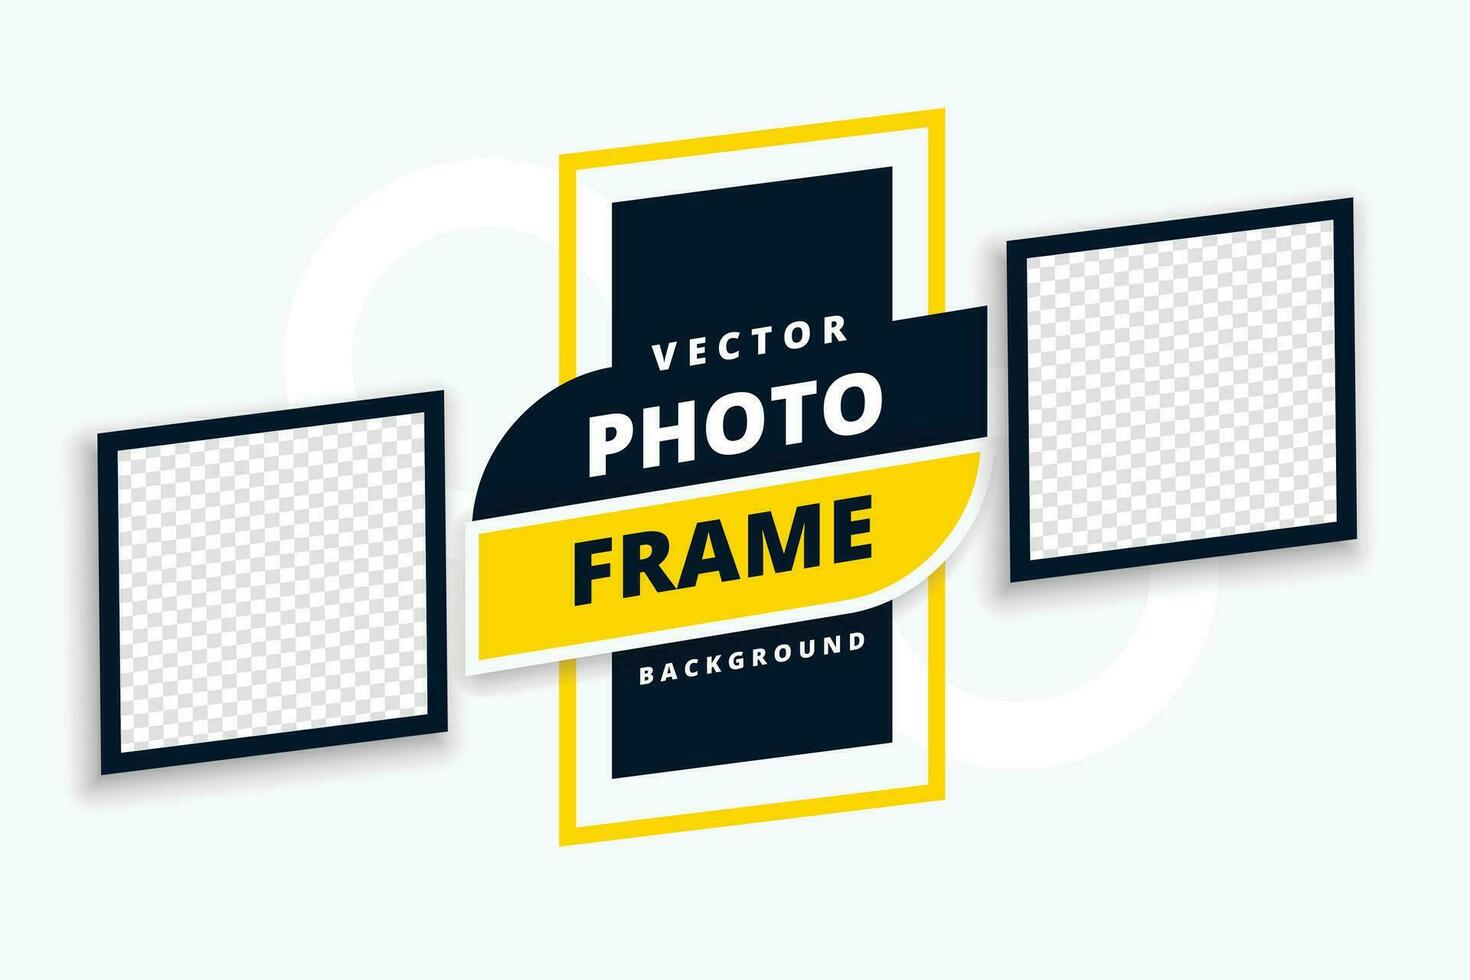 template design with two photo frames vector